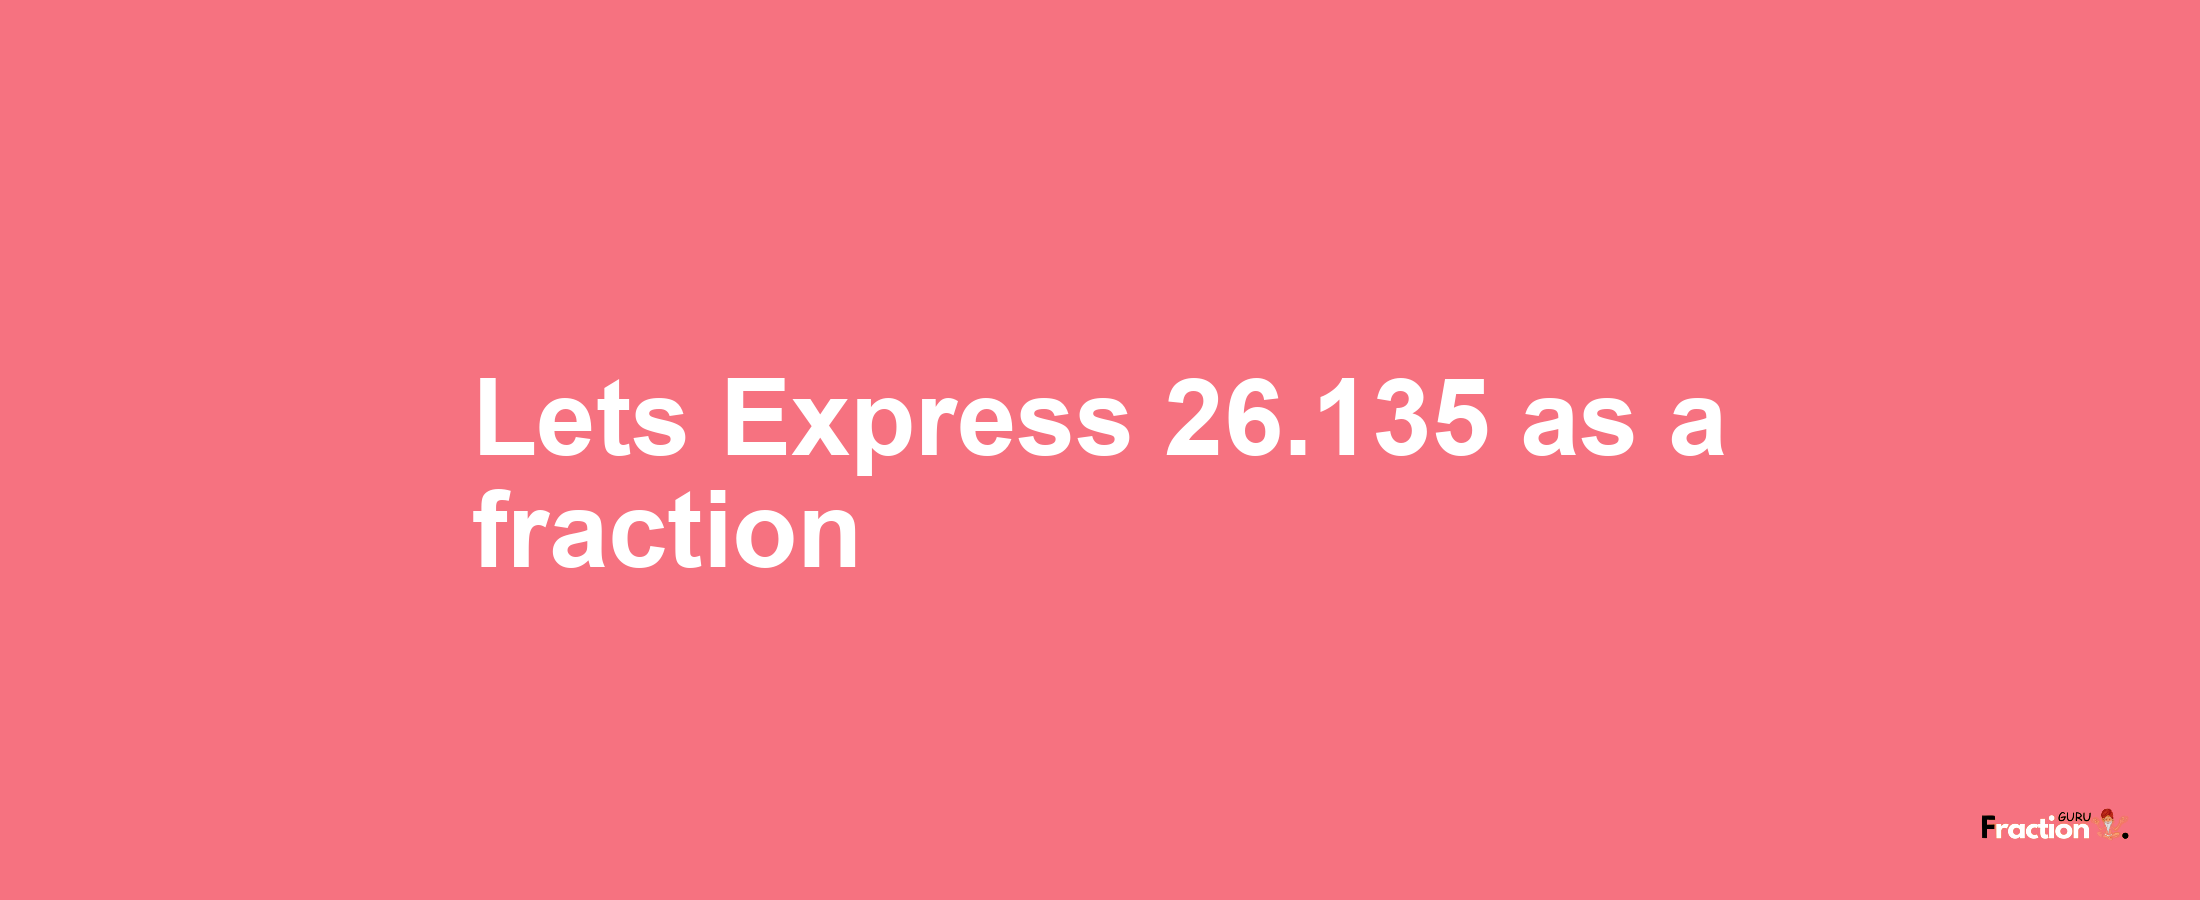 Lets Express 26.135 as afraction